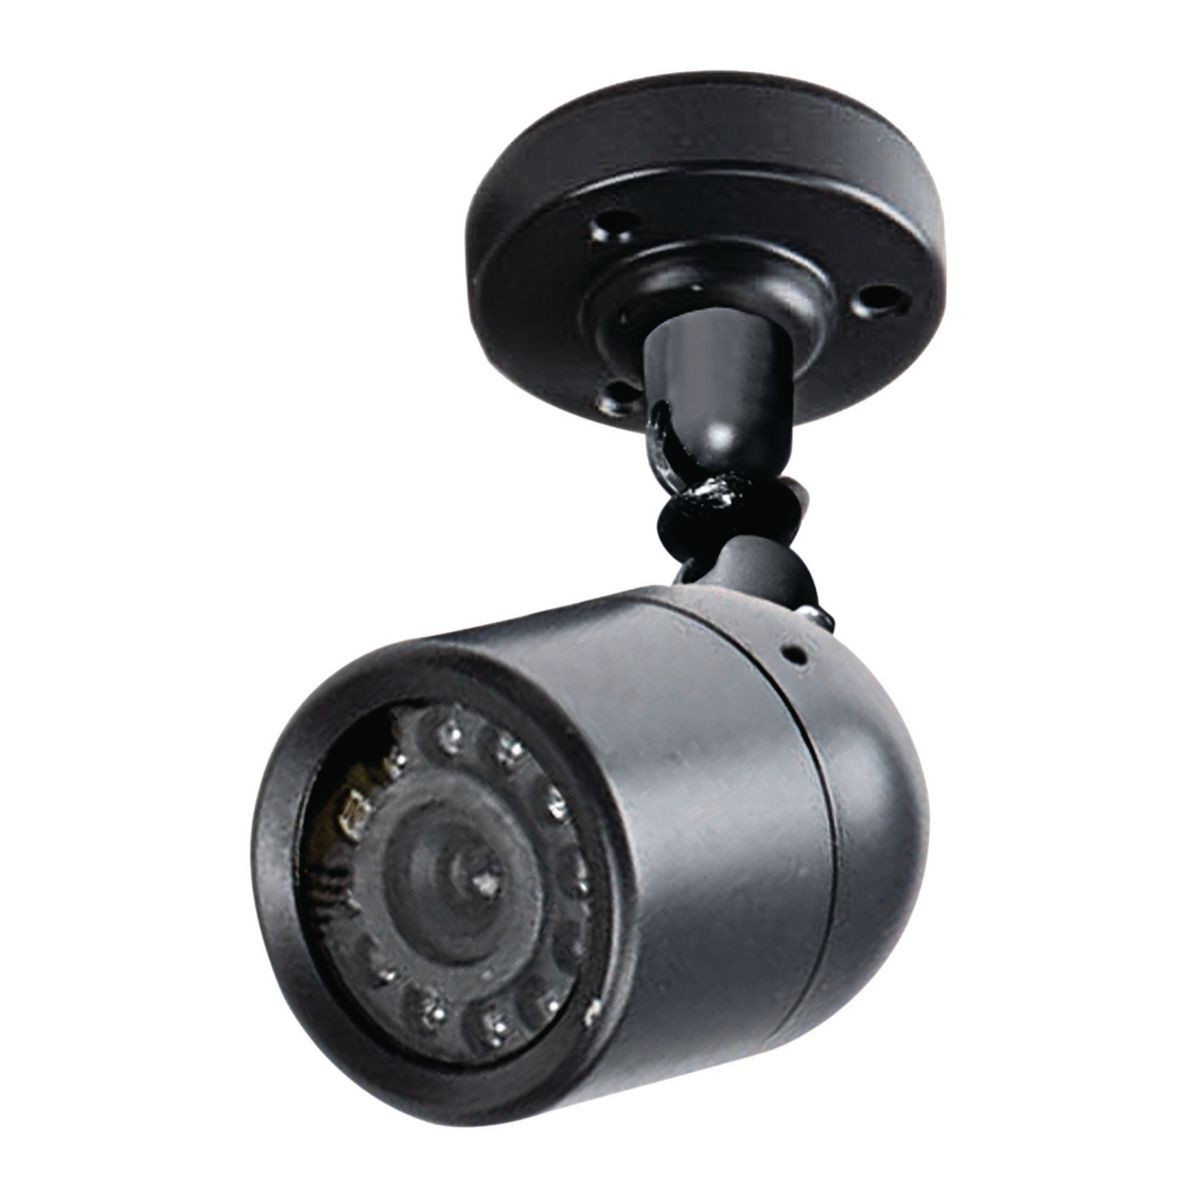 bunker hill security wireless color security camera 62368